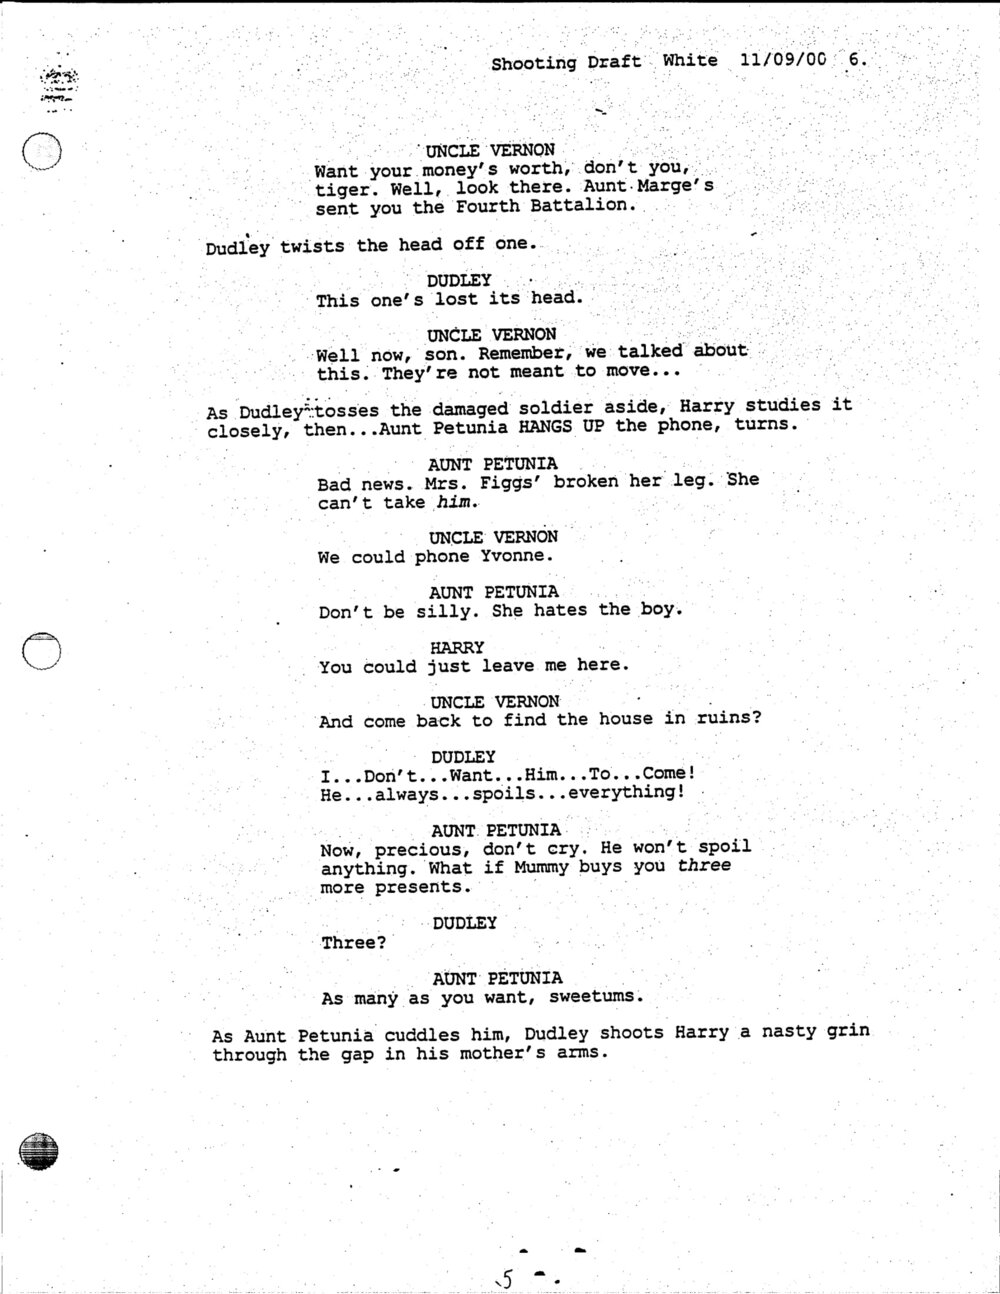 More conversation in Privet Drive before the Zoo - Script Page 6.jpg